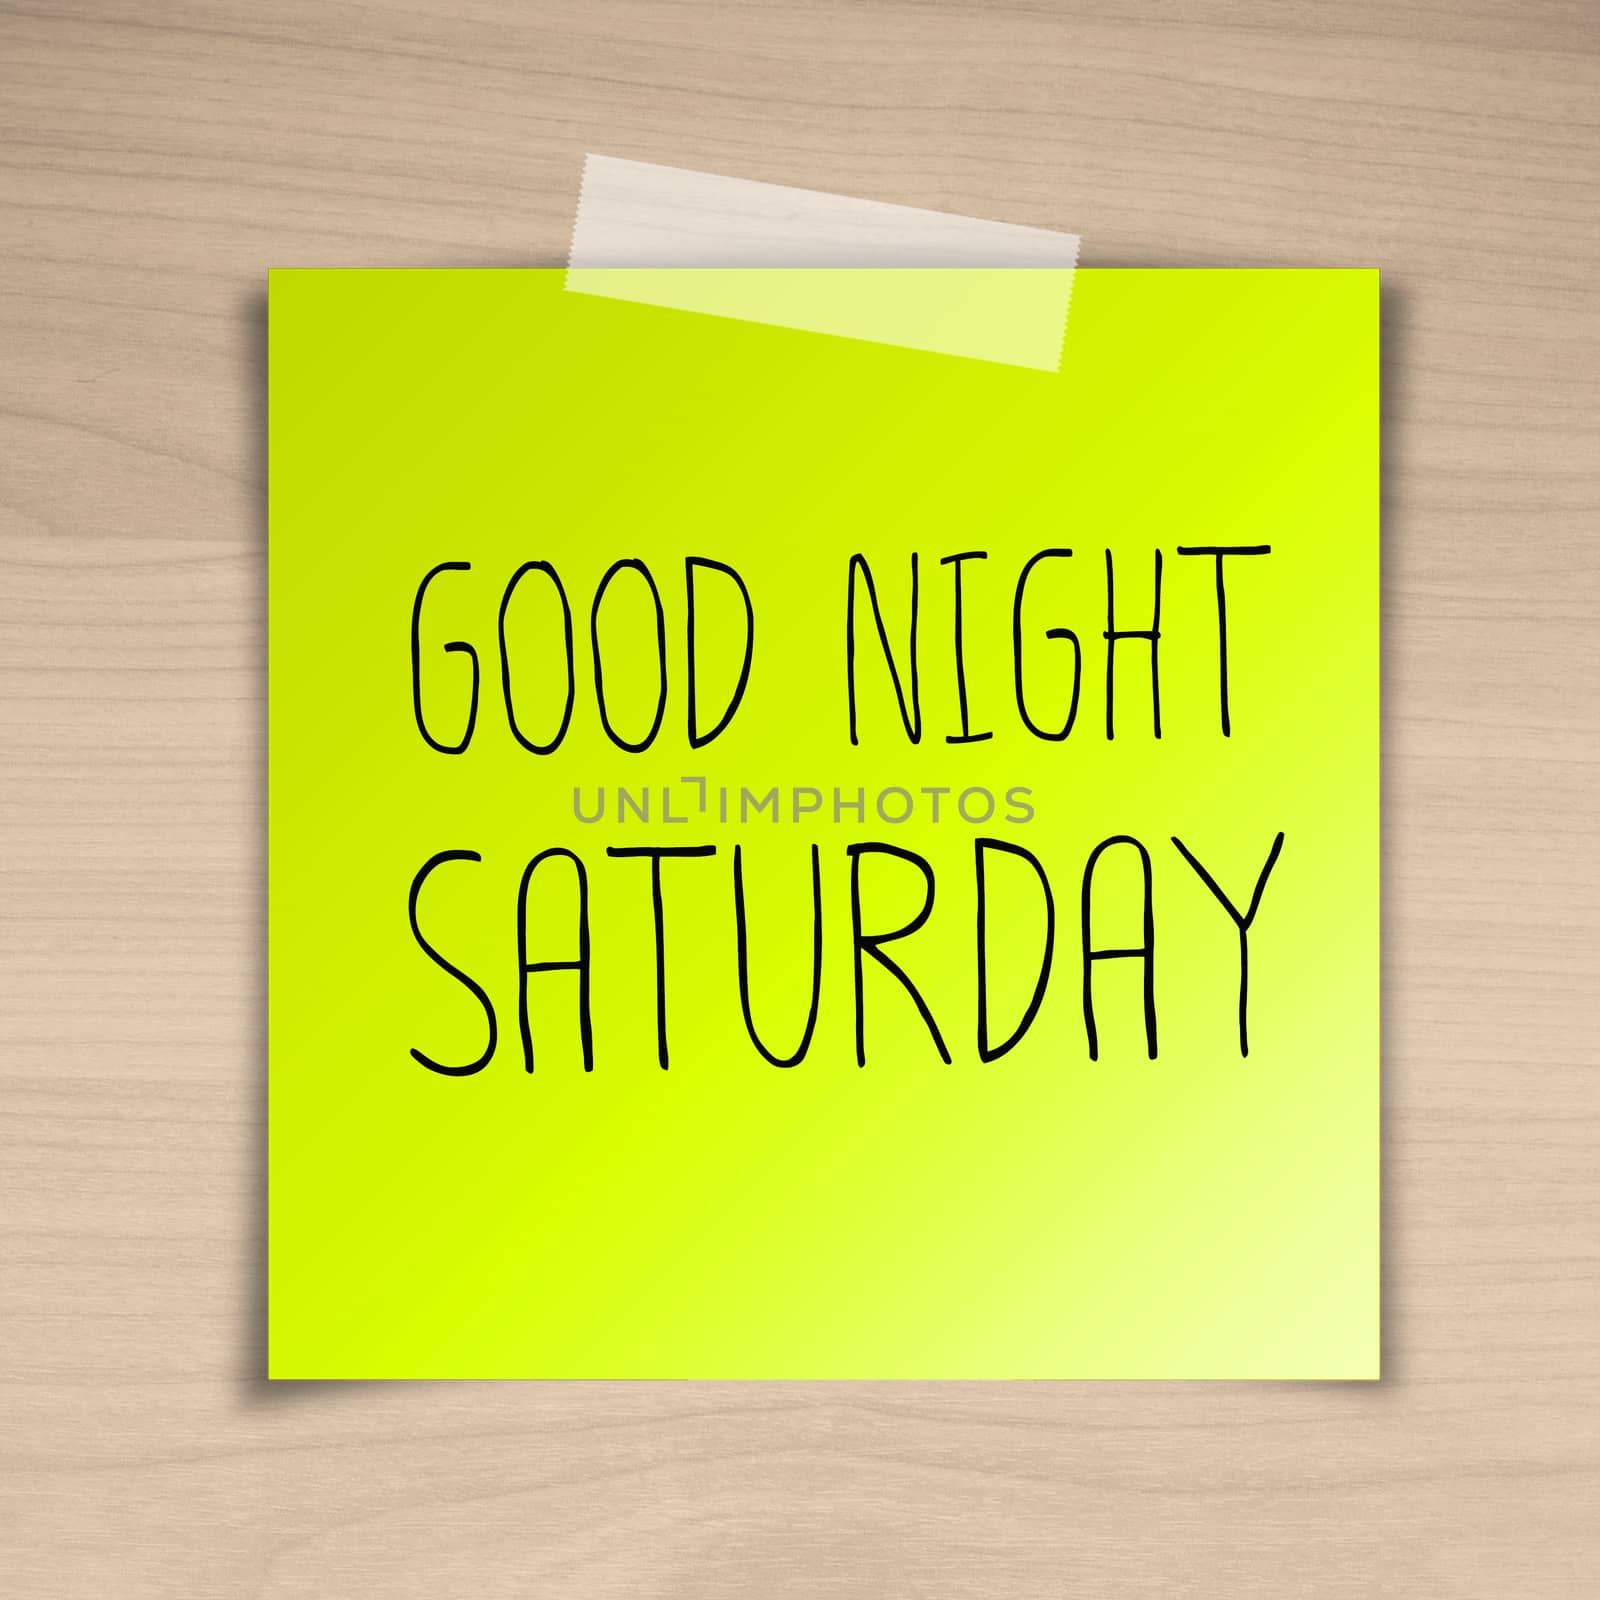 Good night saturday sticky paper on brown wood background texture